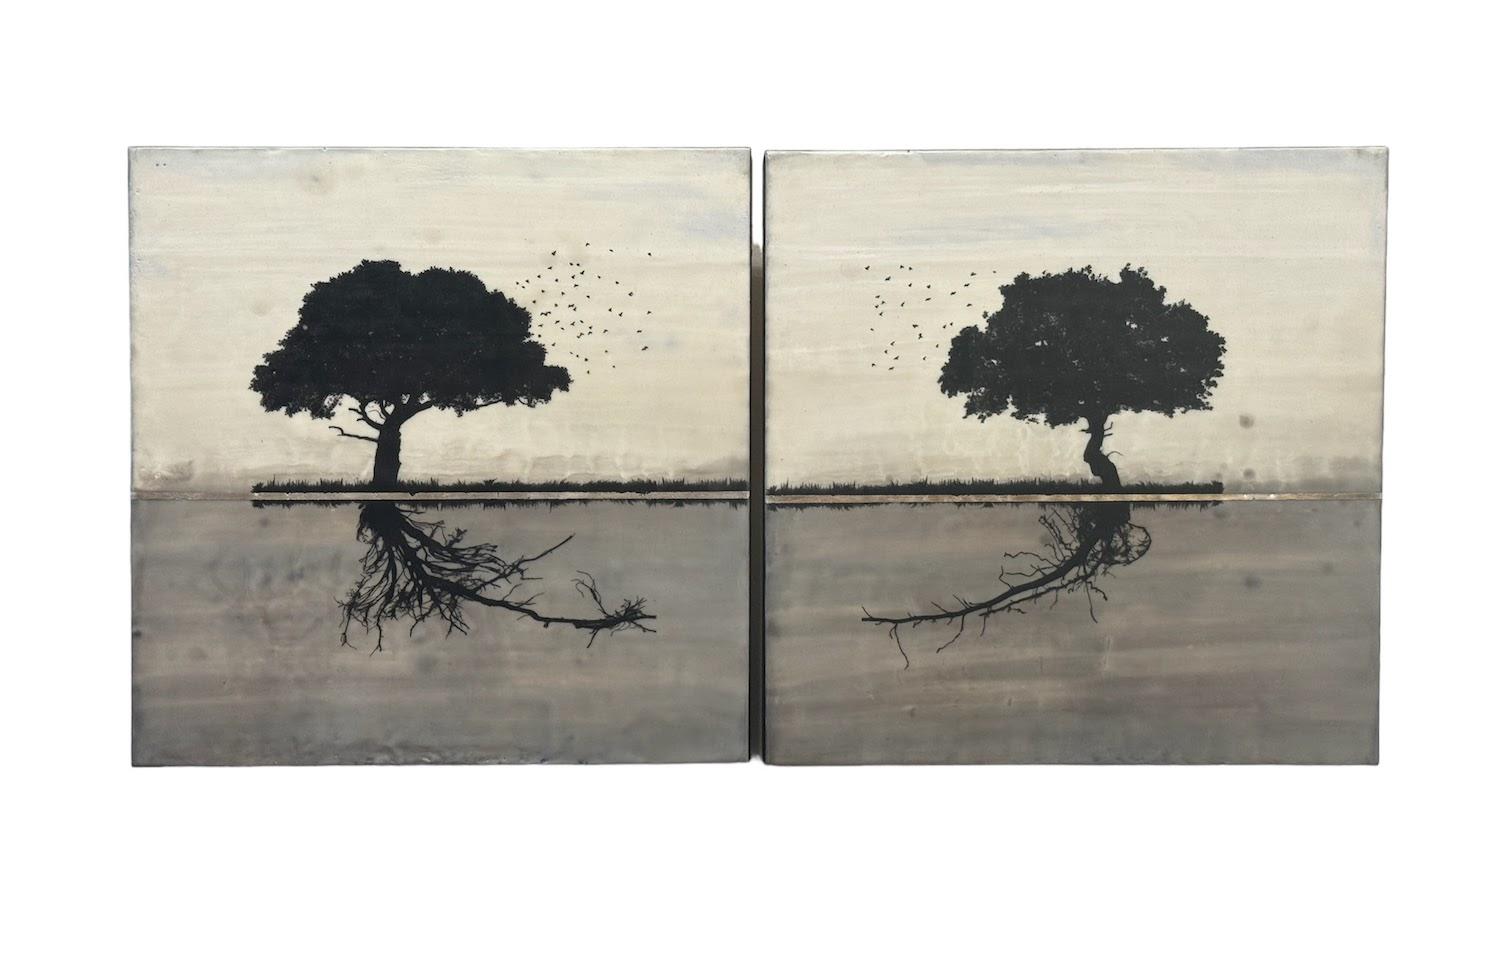 <p>Artist Comments<br>A diptych of trees boasts distinct silhouettes, with their roots seemingly reaching towards each other. Similarly, birds from their branches appear to exchange paths. This encaustic artwork, made with beeswax and a torch,